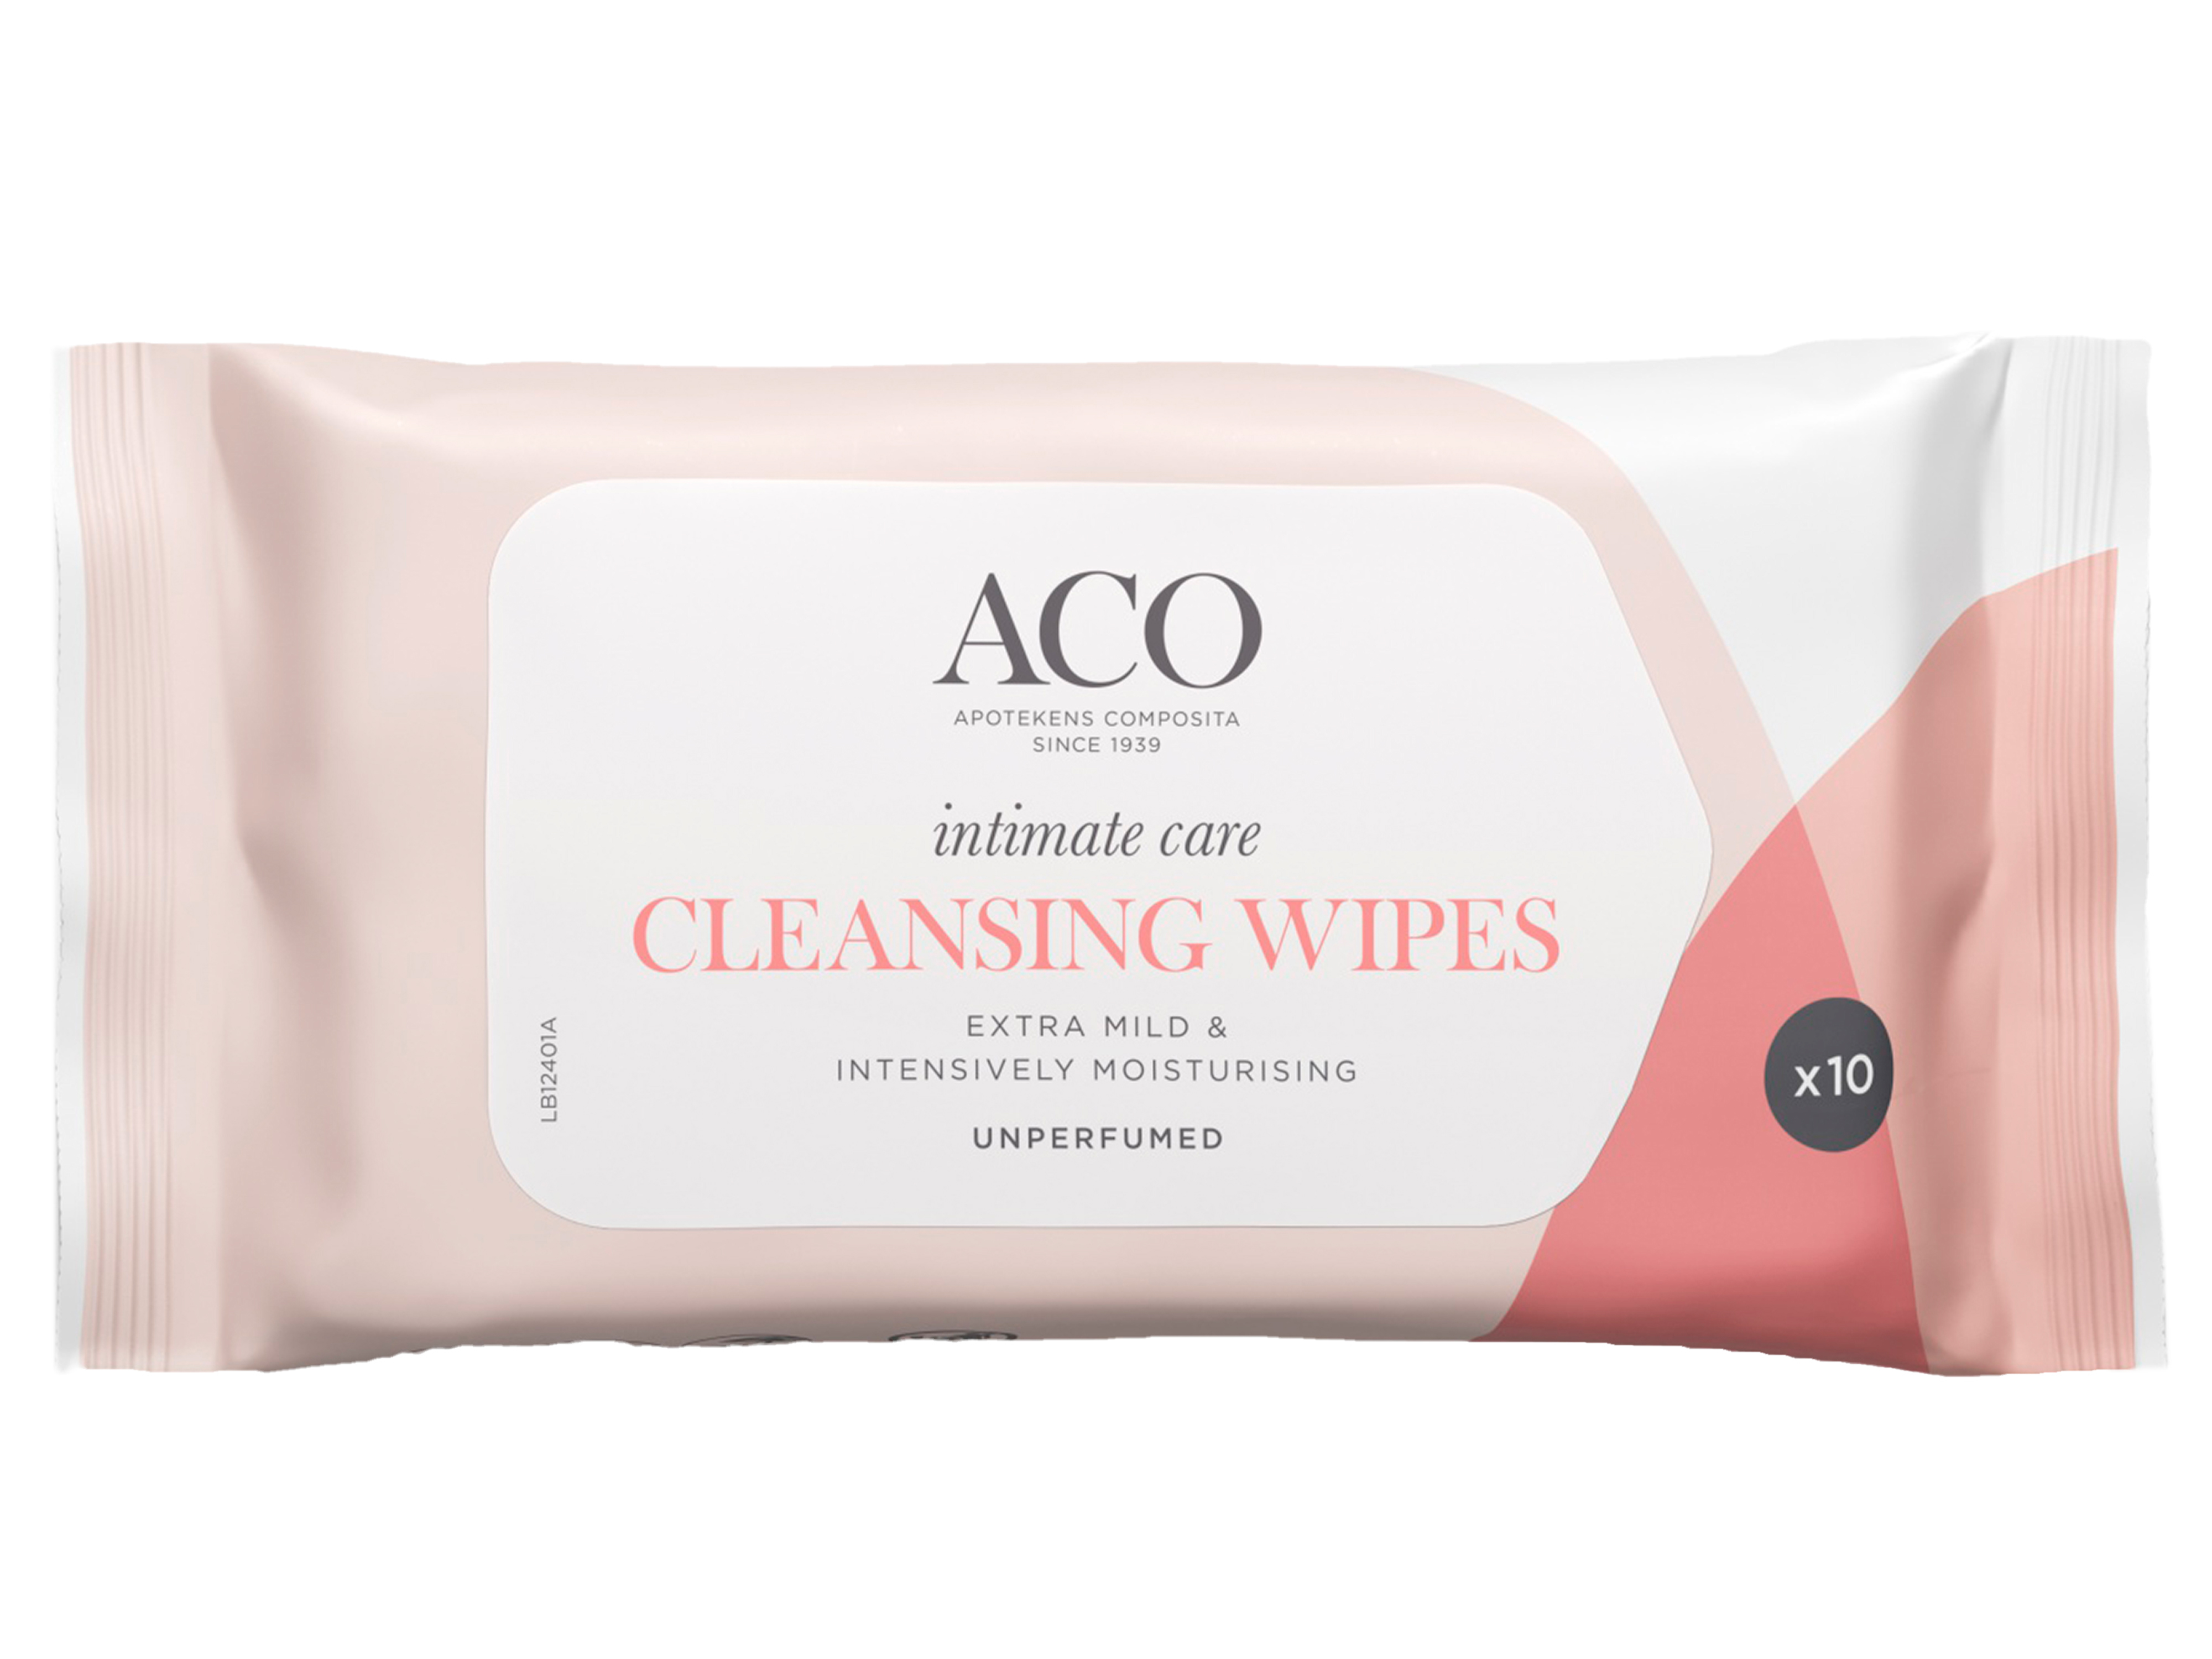 Intimate Care Cleansing Wipes, 10 stk